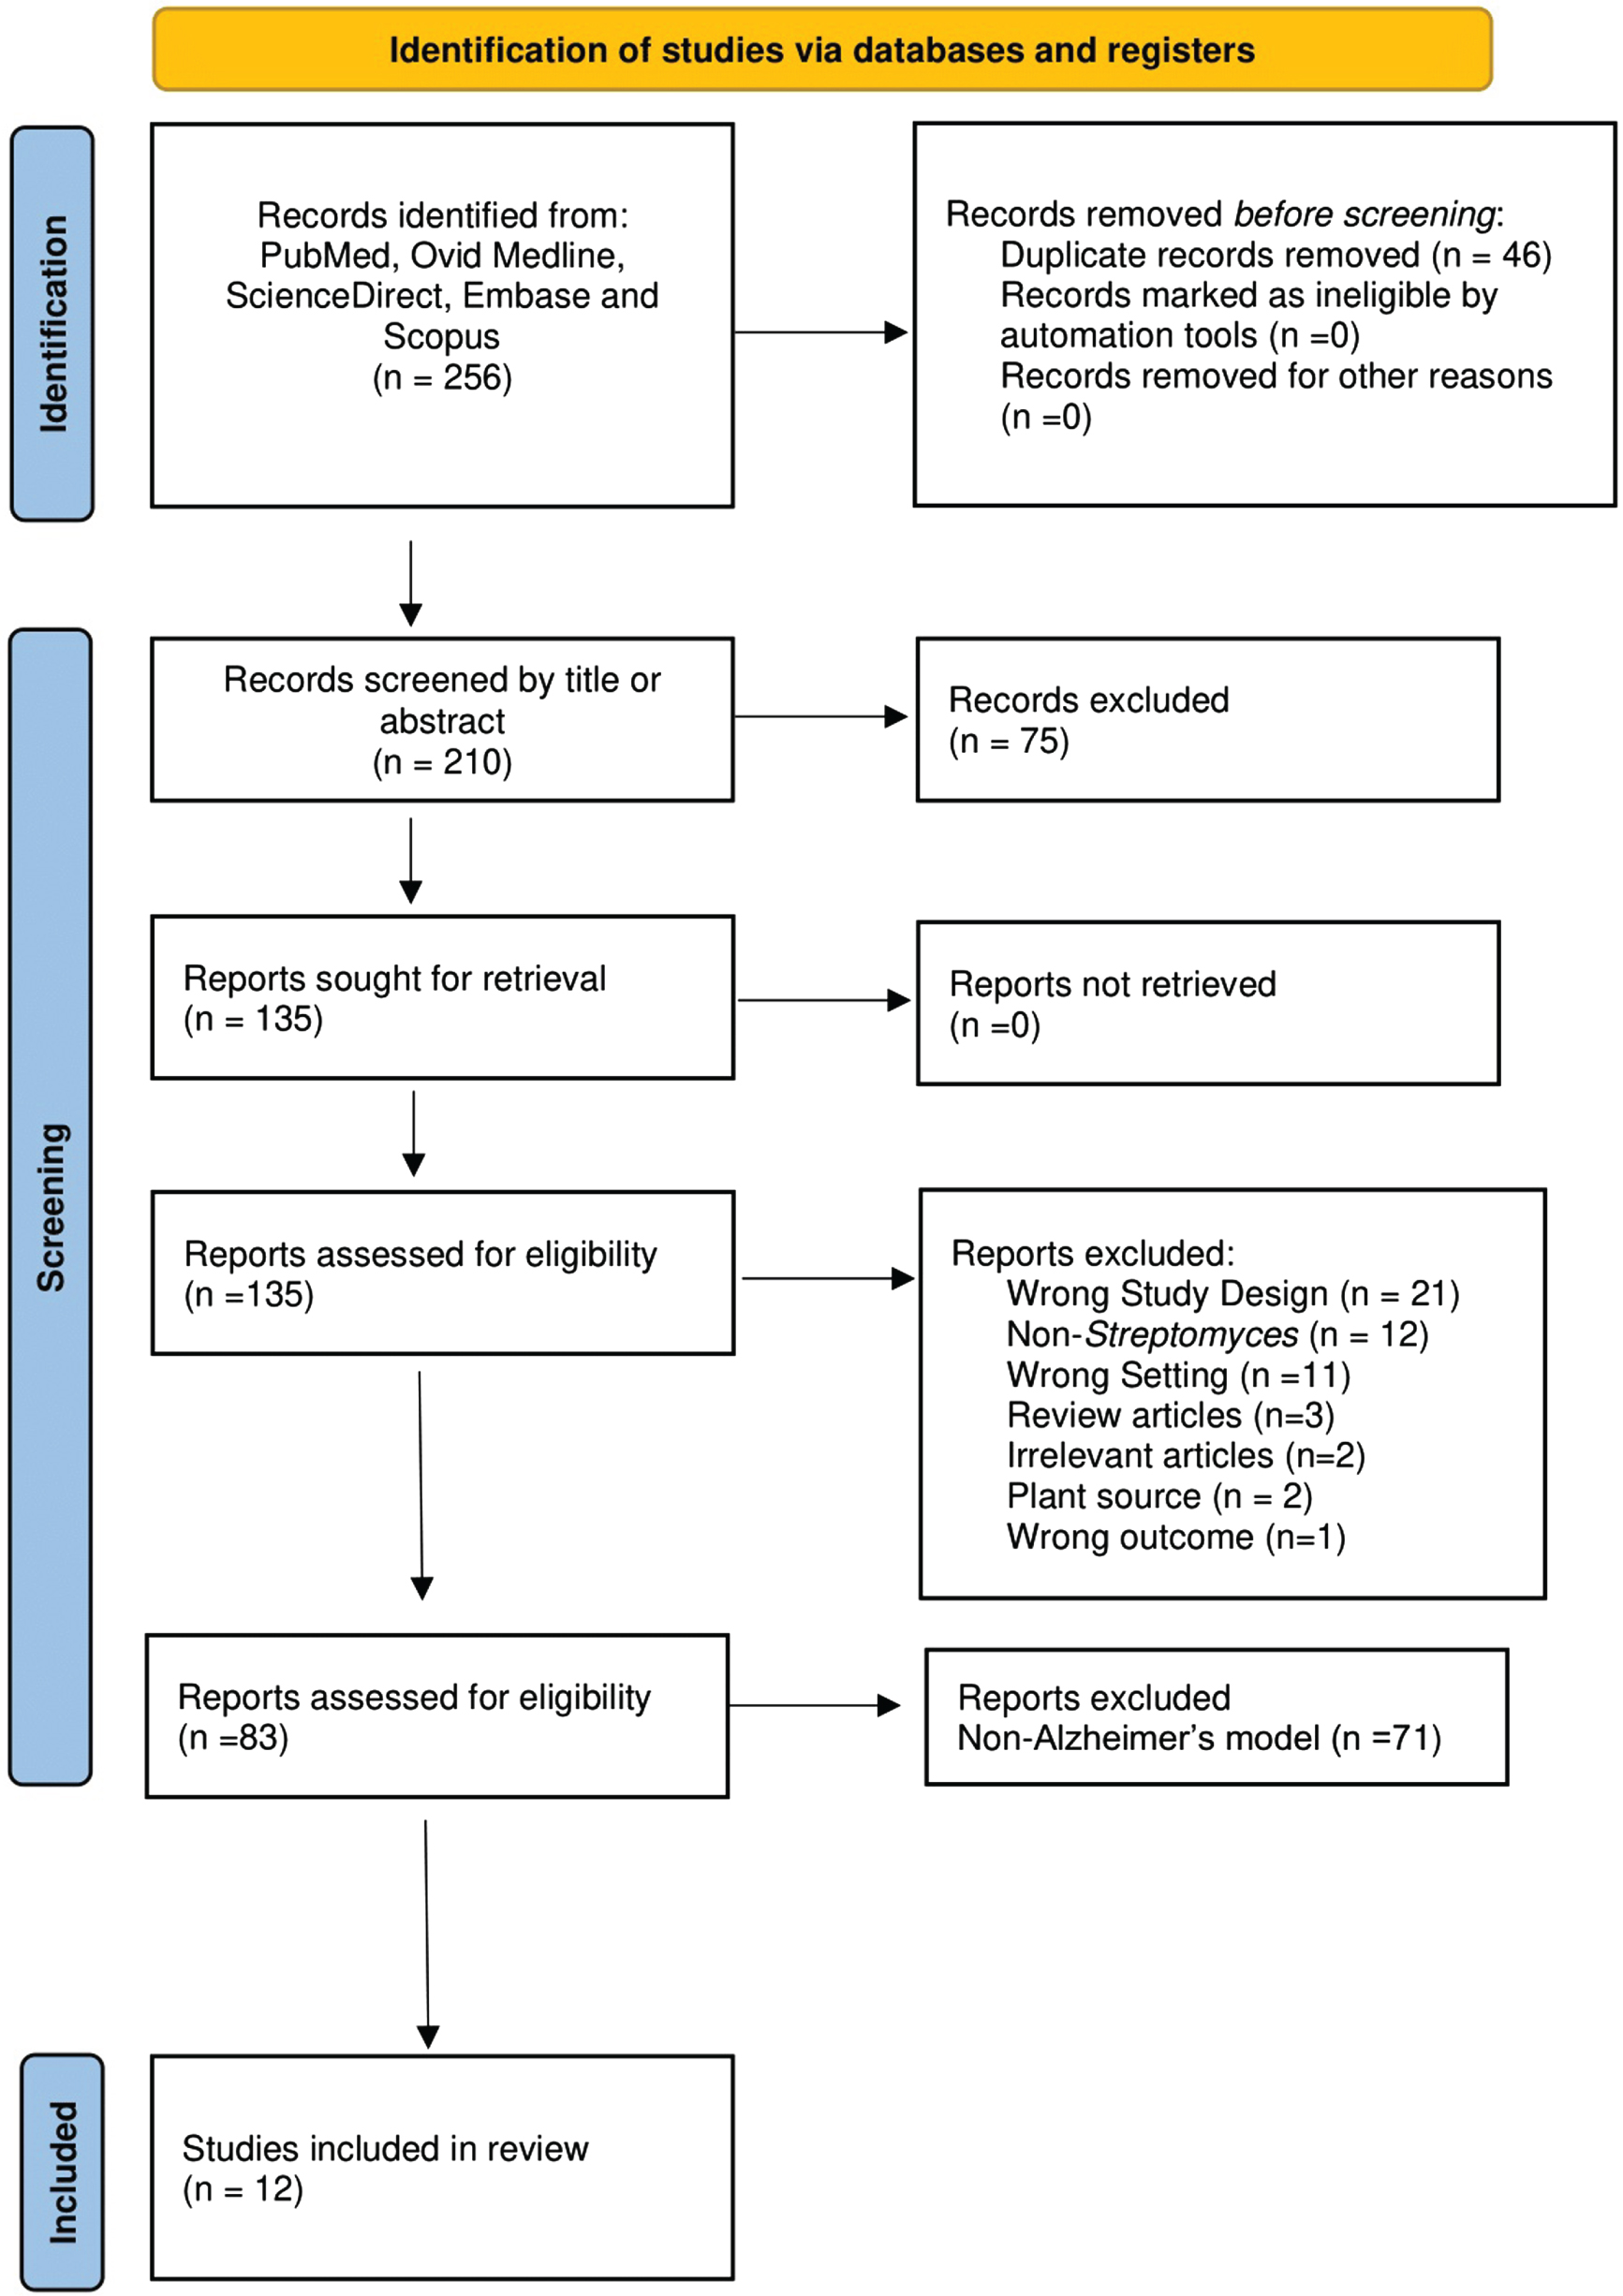 PRISMA flow chart (2020) PRISMA, Preferred Reported Items for Systematic Review and Meta-analysis [12] outlining the step-by-step process involved in the selection of studies included for this scoping review. *n, number.